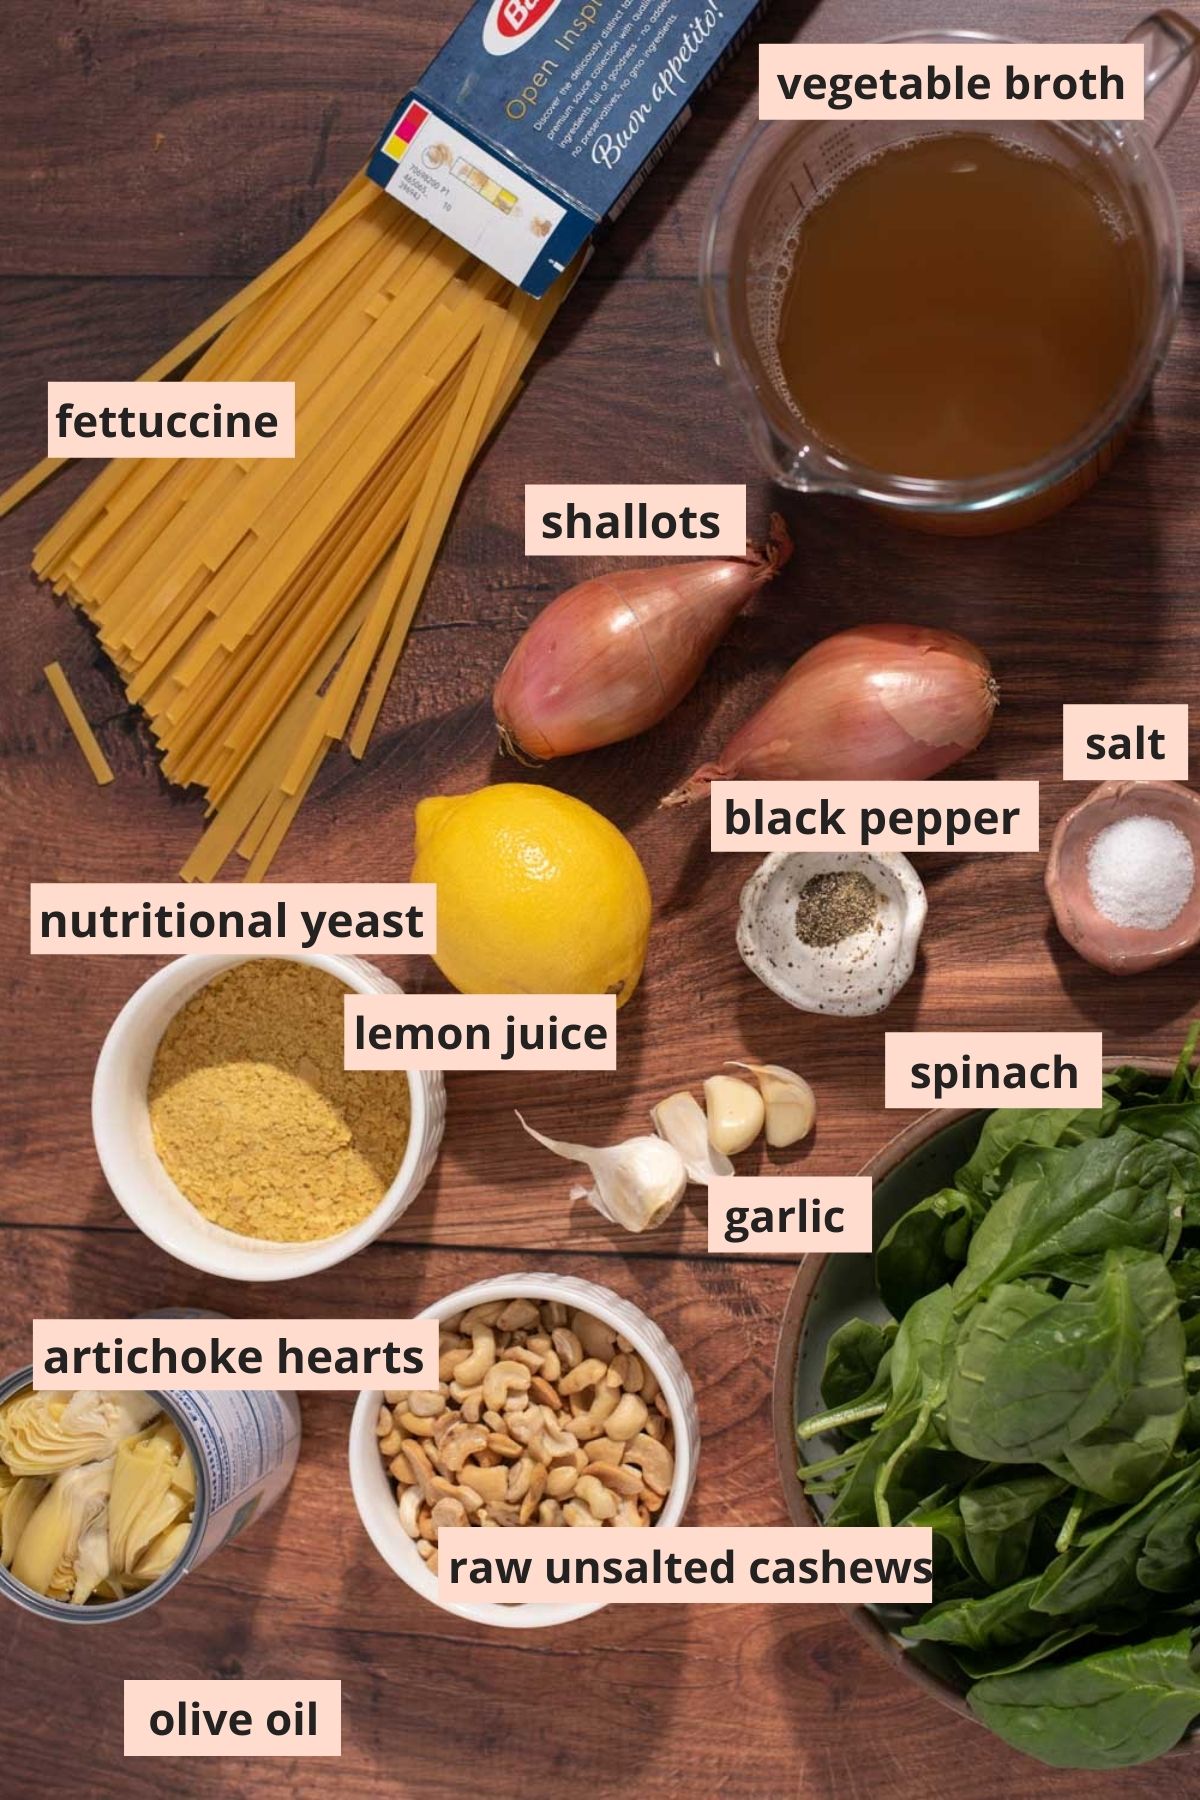 Labeled ingredients used to make spinach artichoke pasta